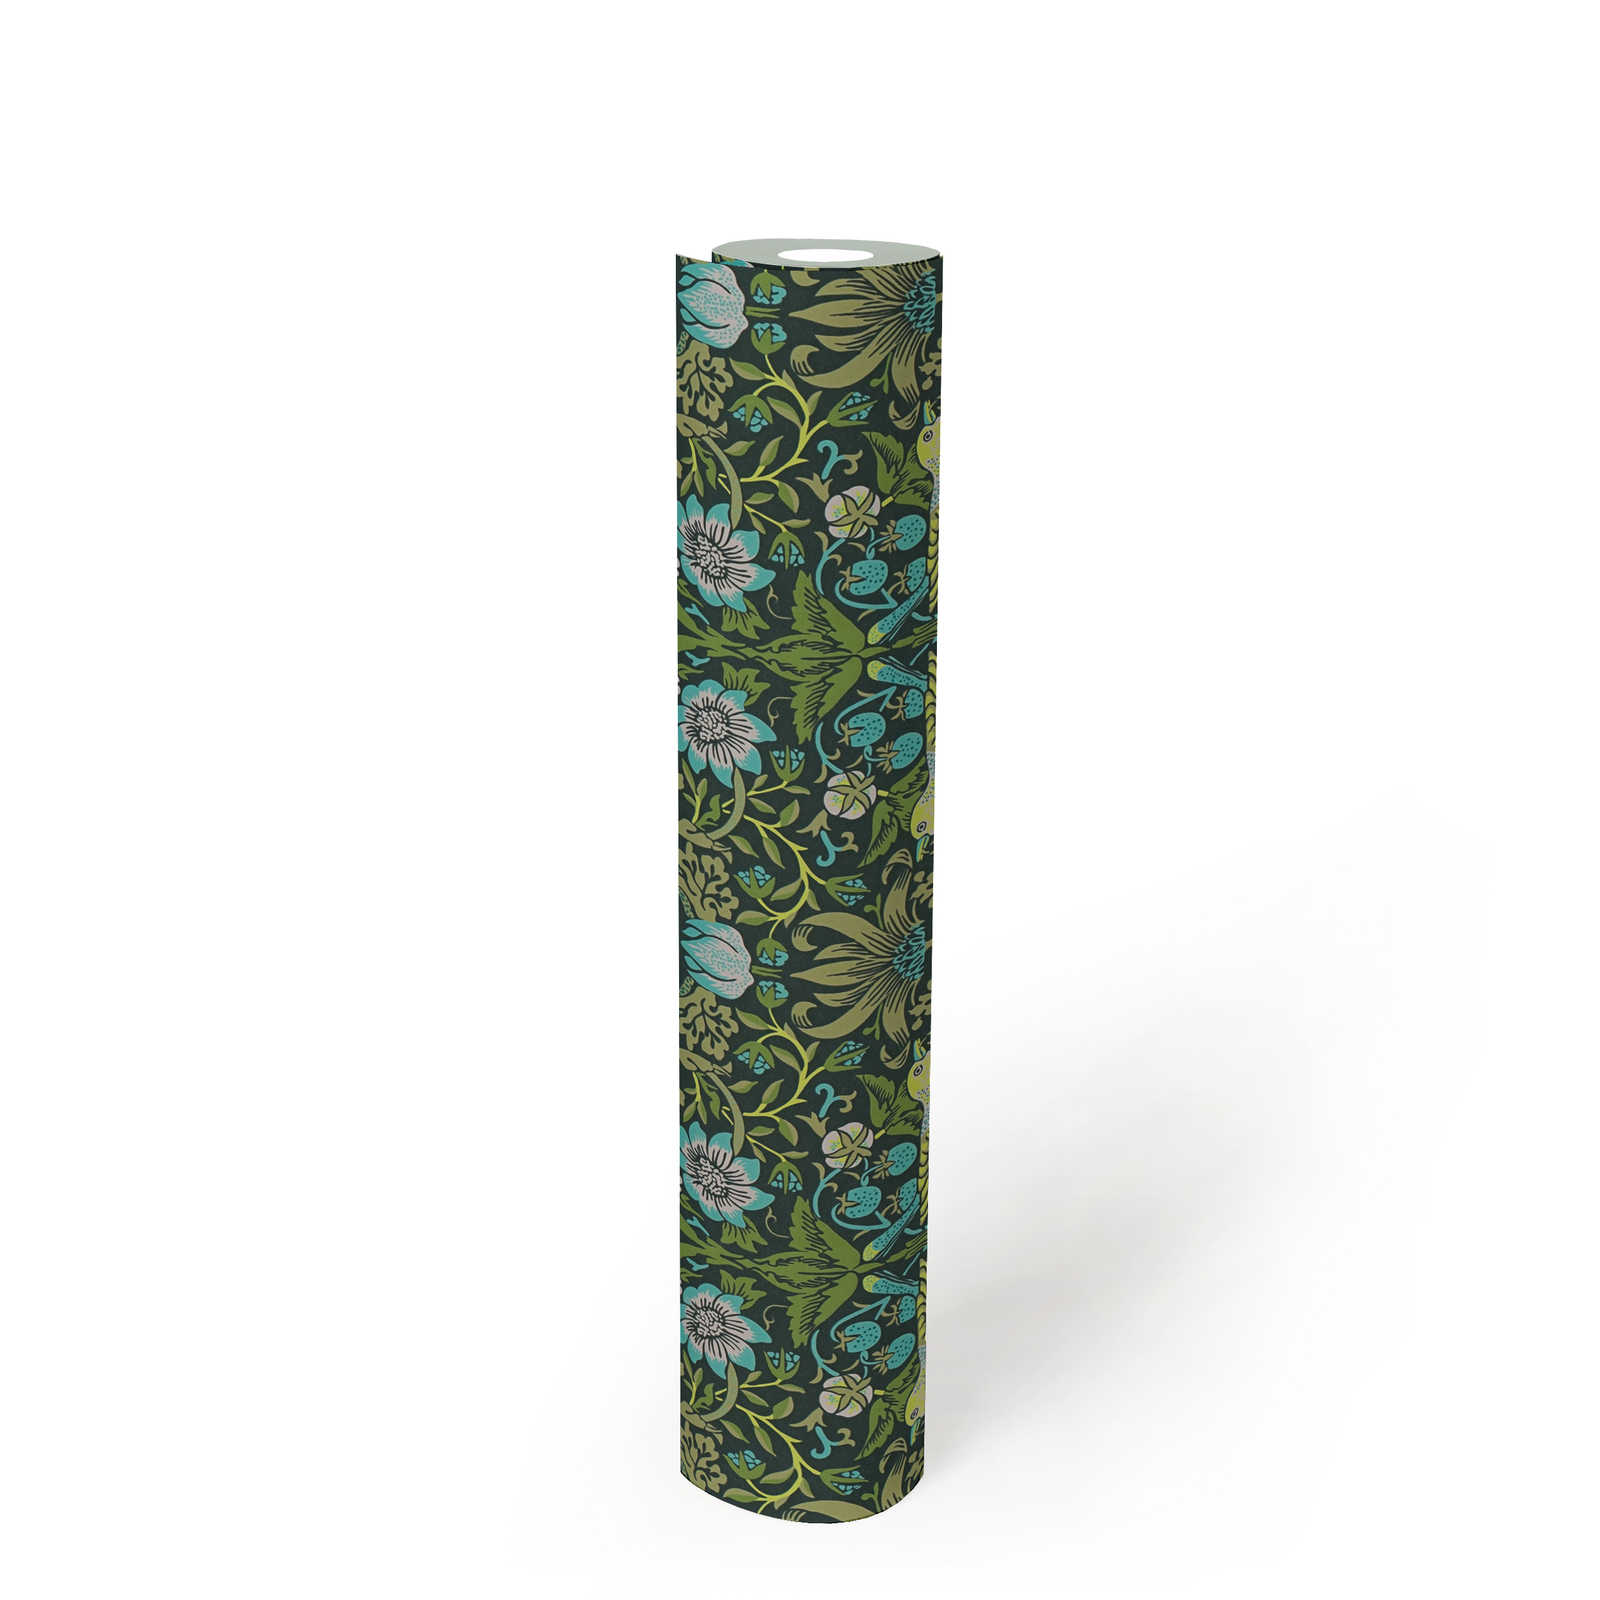             Non-woven wallpaper floral pattern with birds - green, blue, black
        